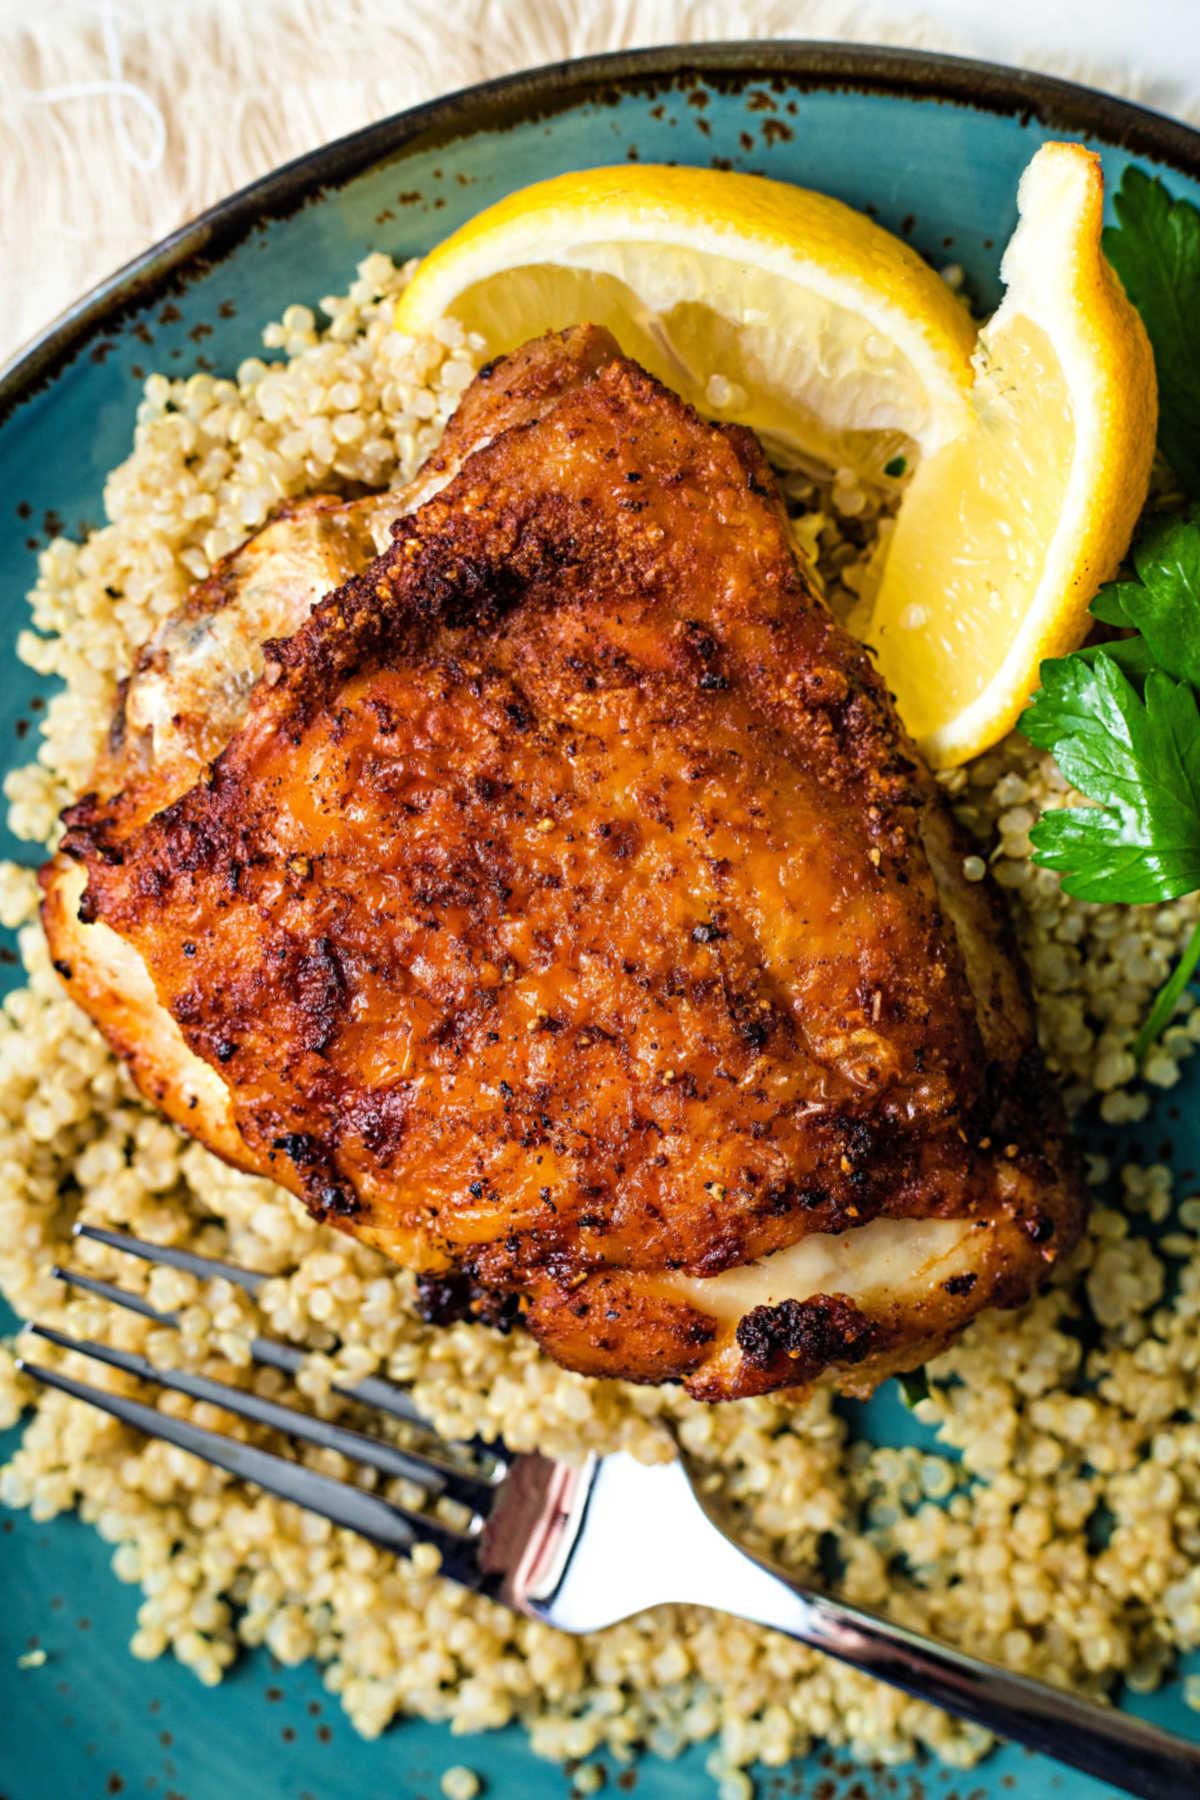 an air fryer chicken thigh on a bed of couscous on a blue plate with a lemon wedge garnish.